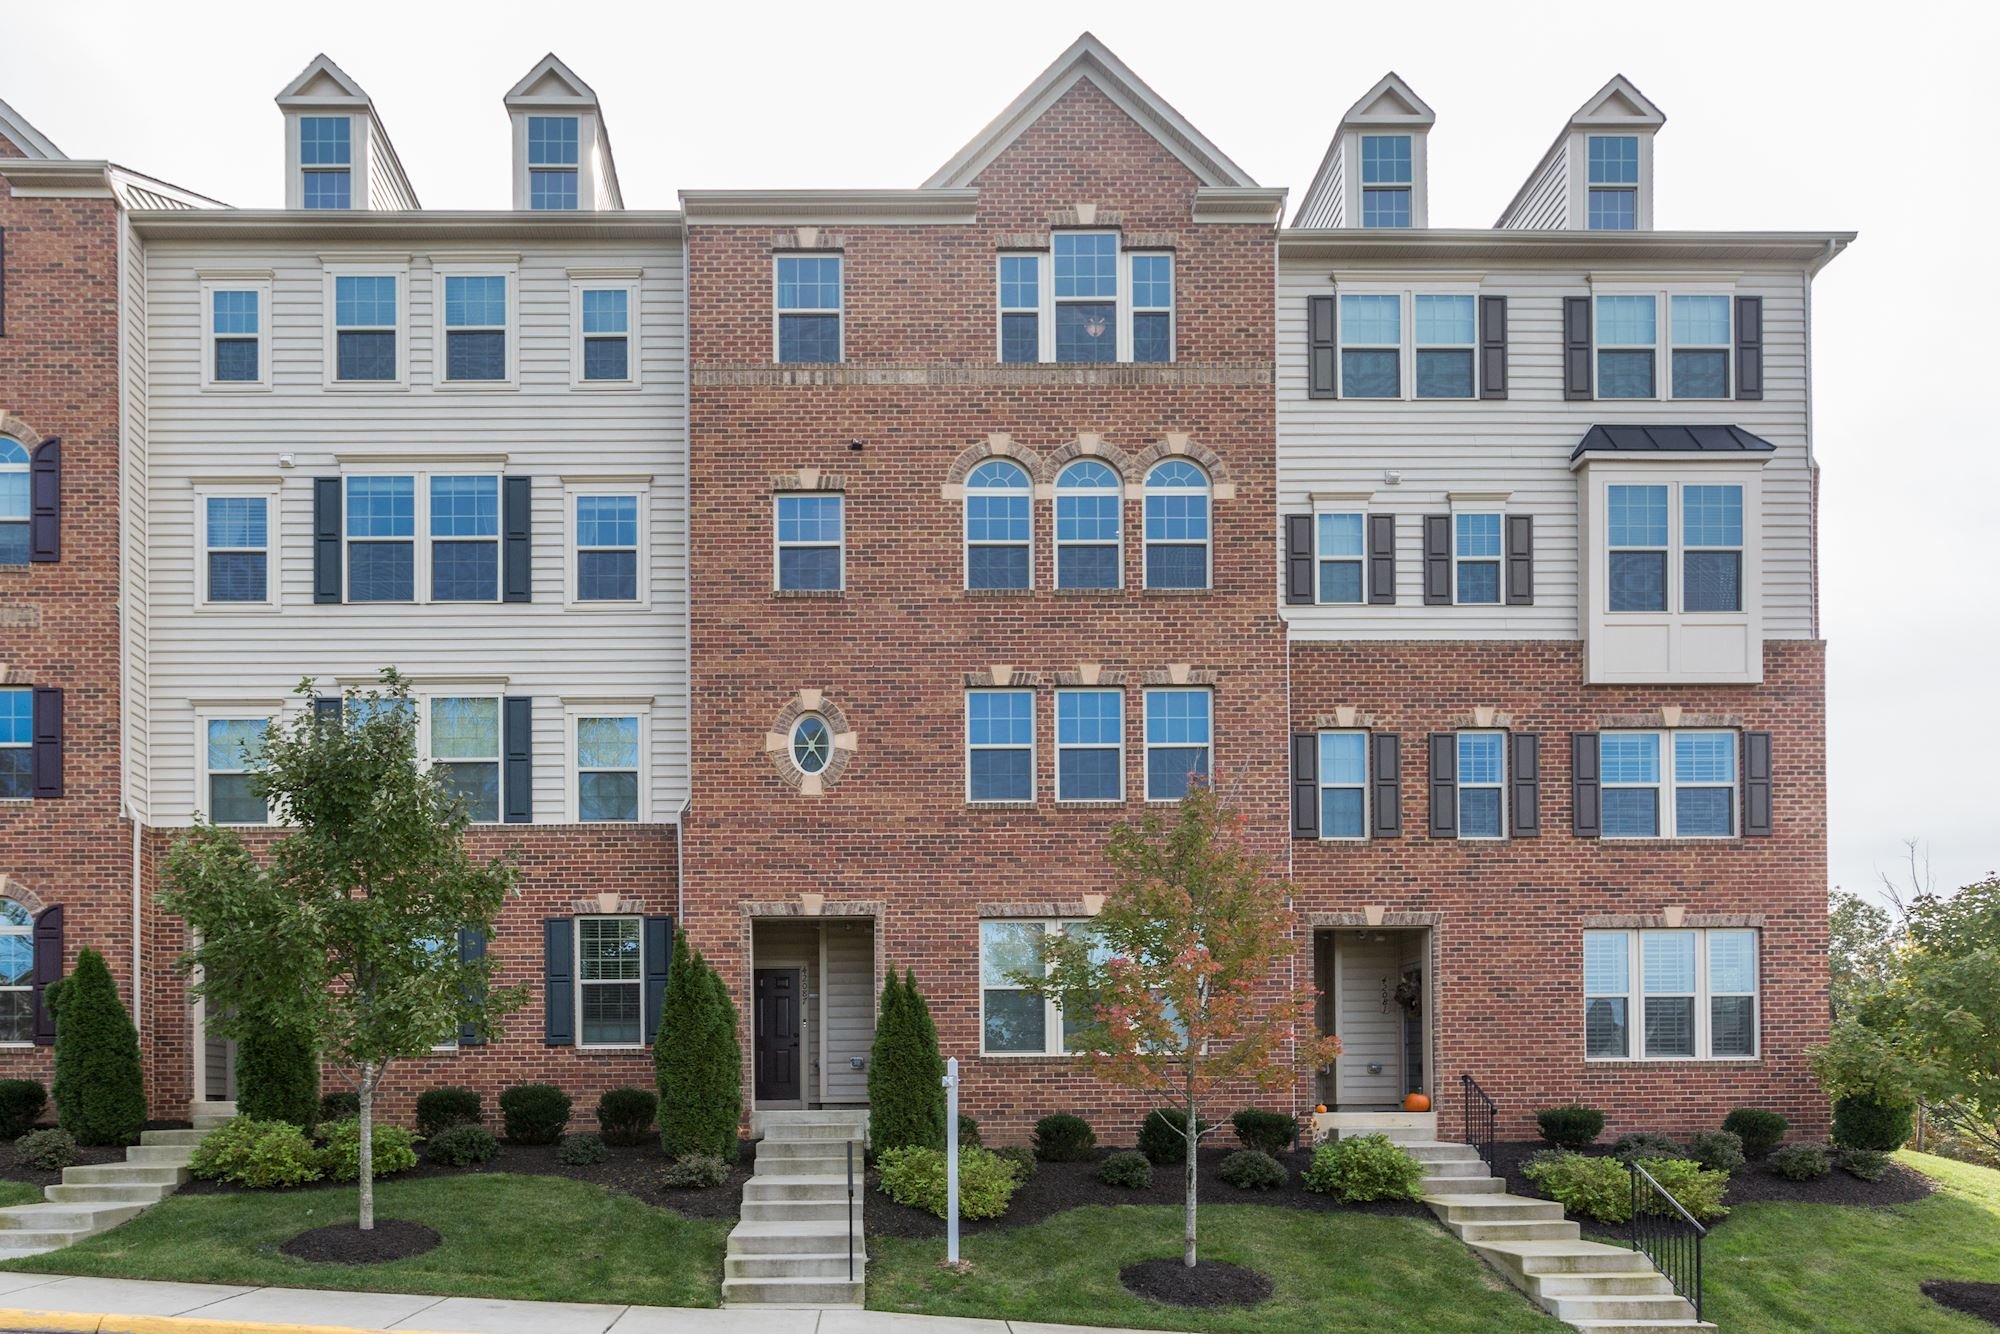 NEW LISTING: 3 BD Upgraded Townhouse-Style Condo